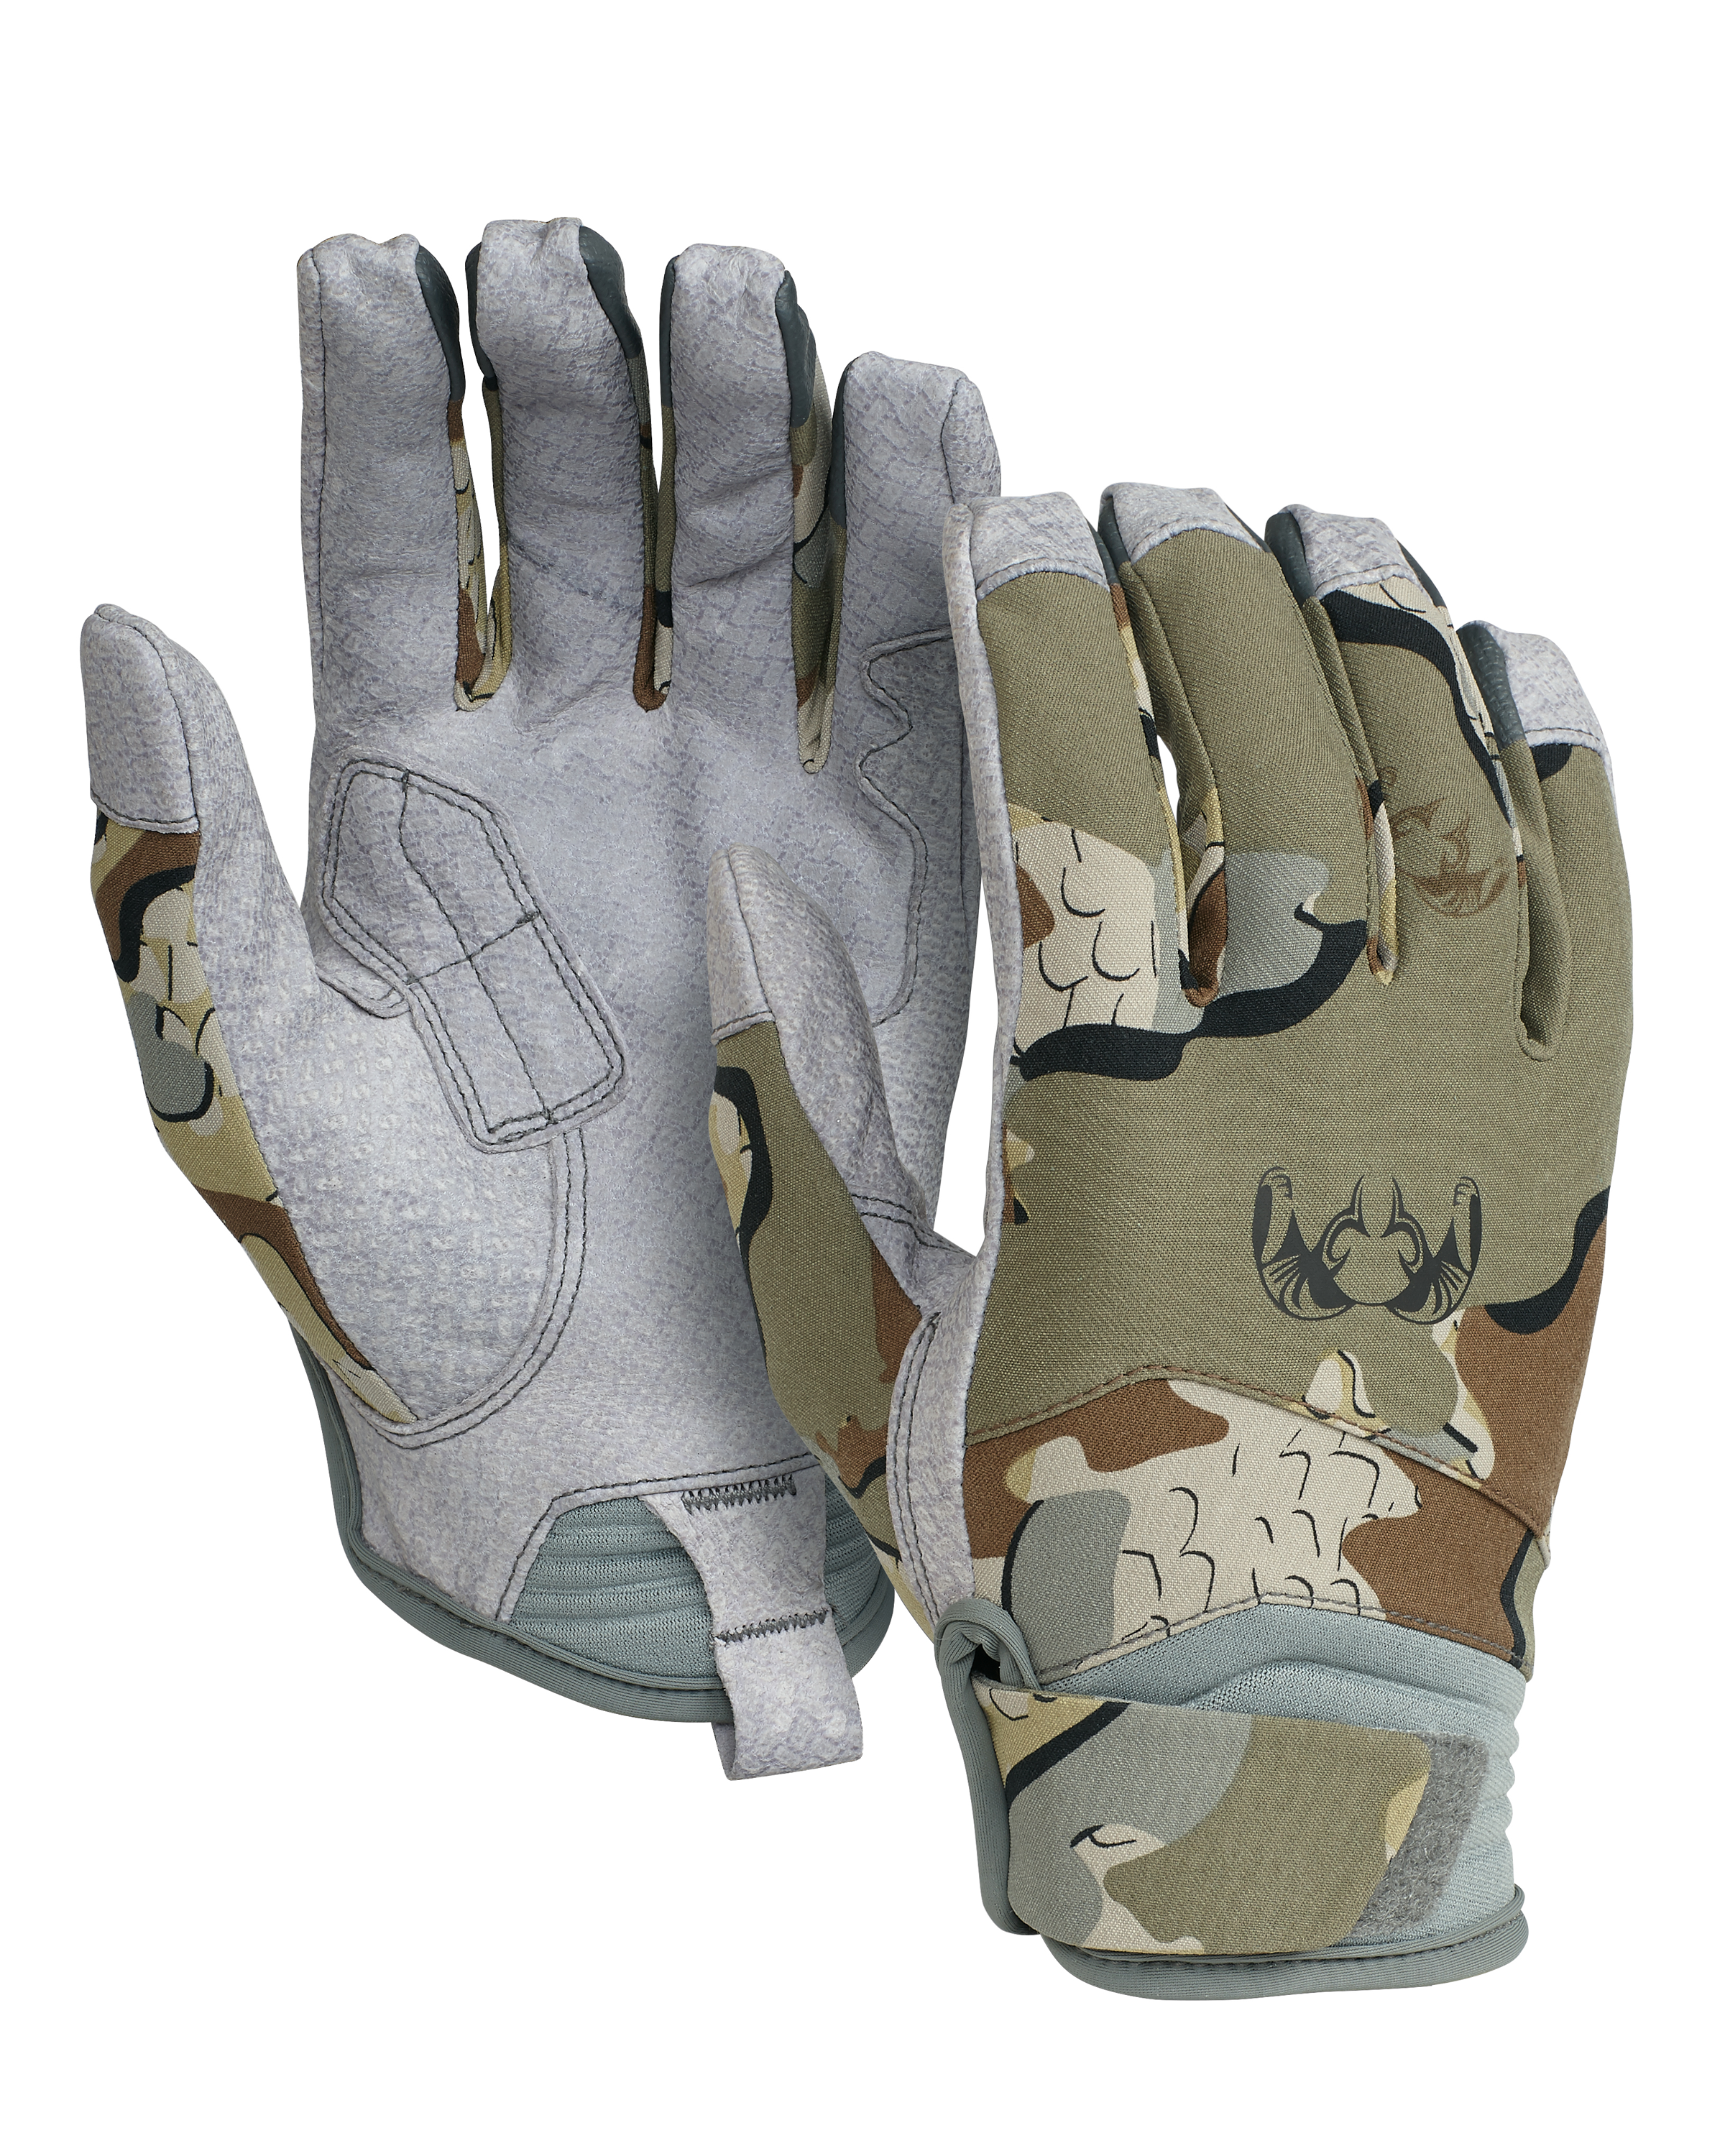 KUIU Attack Hunting Glove in Valo | Size XL